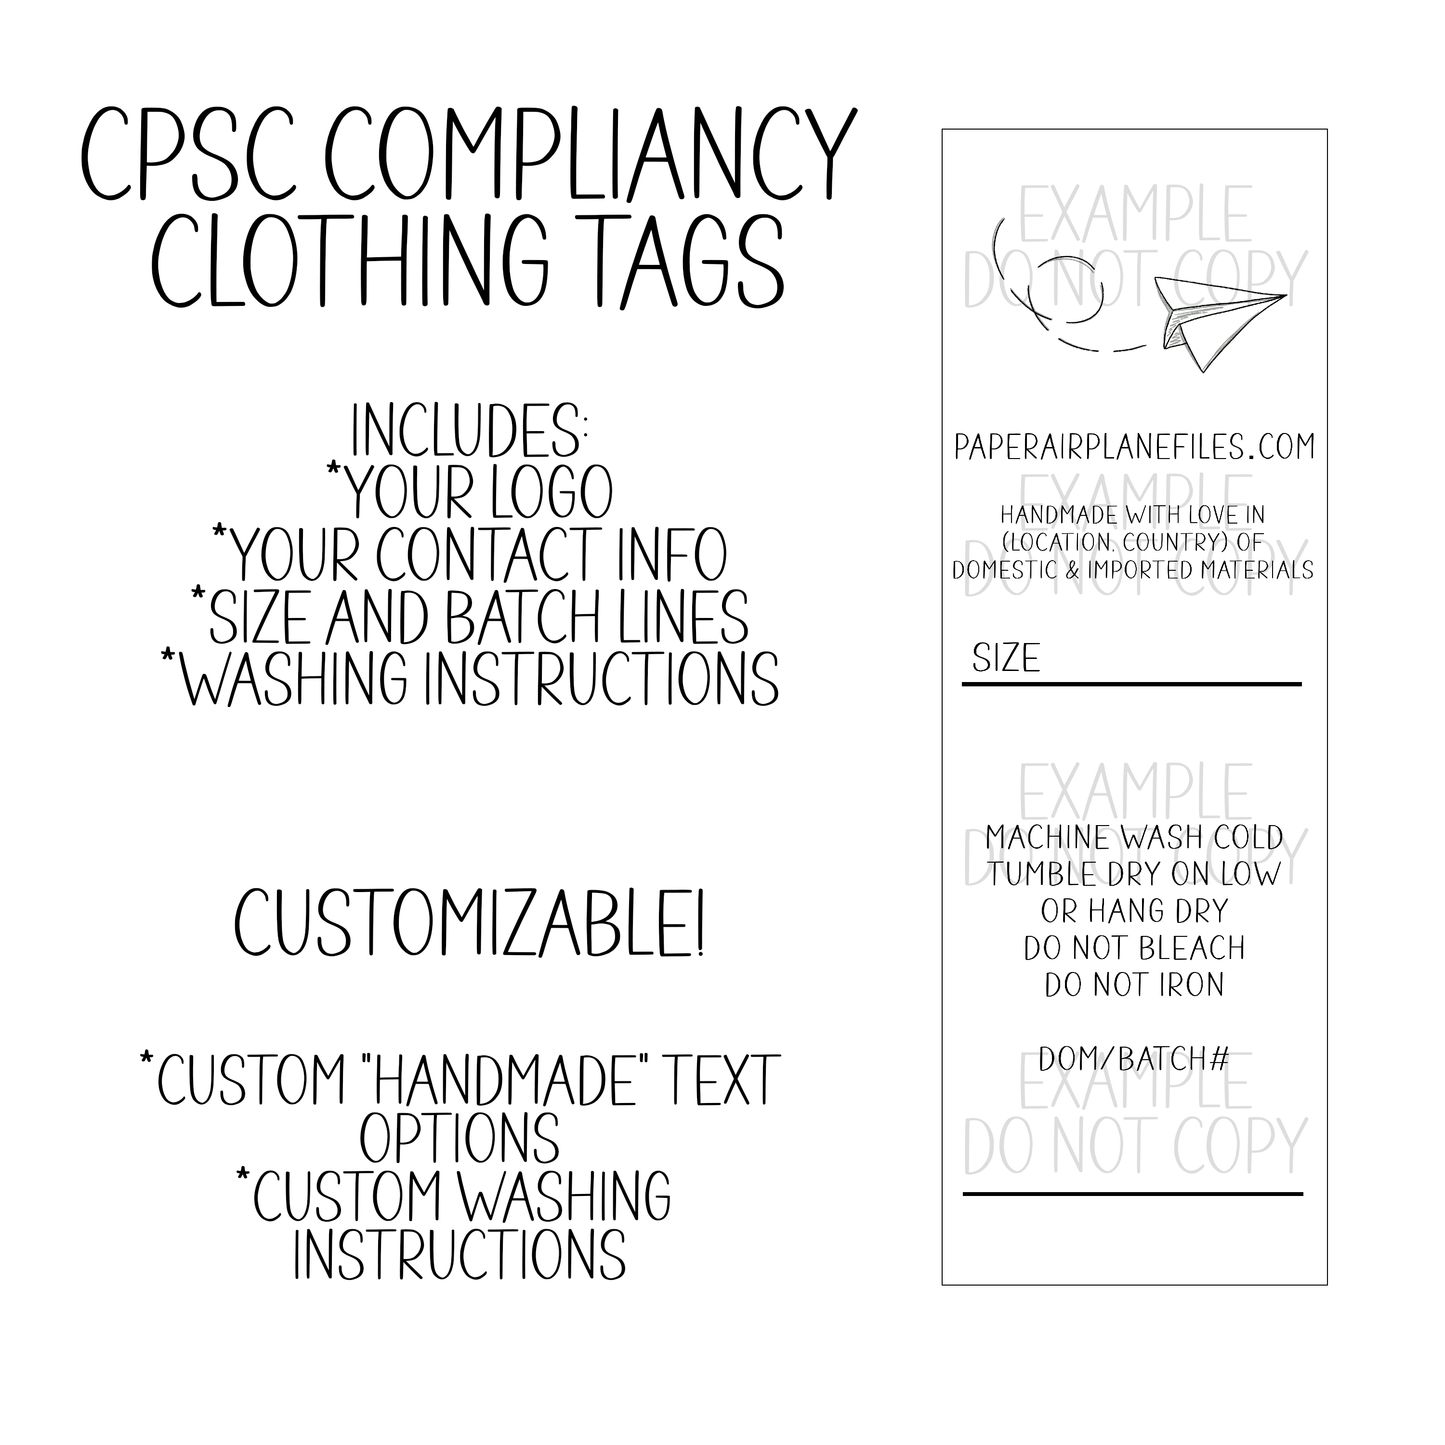 Custom Clothing Tags Digital File *CPSC Compliant!*